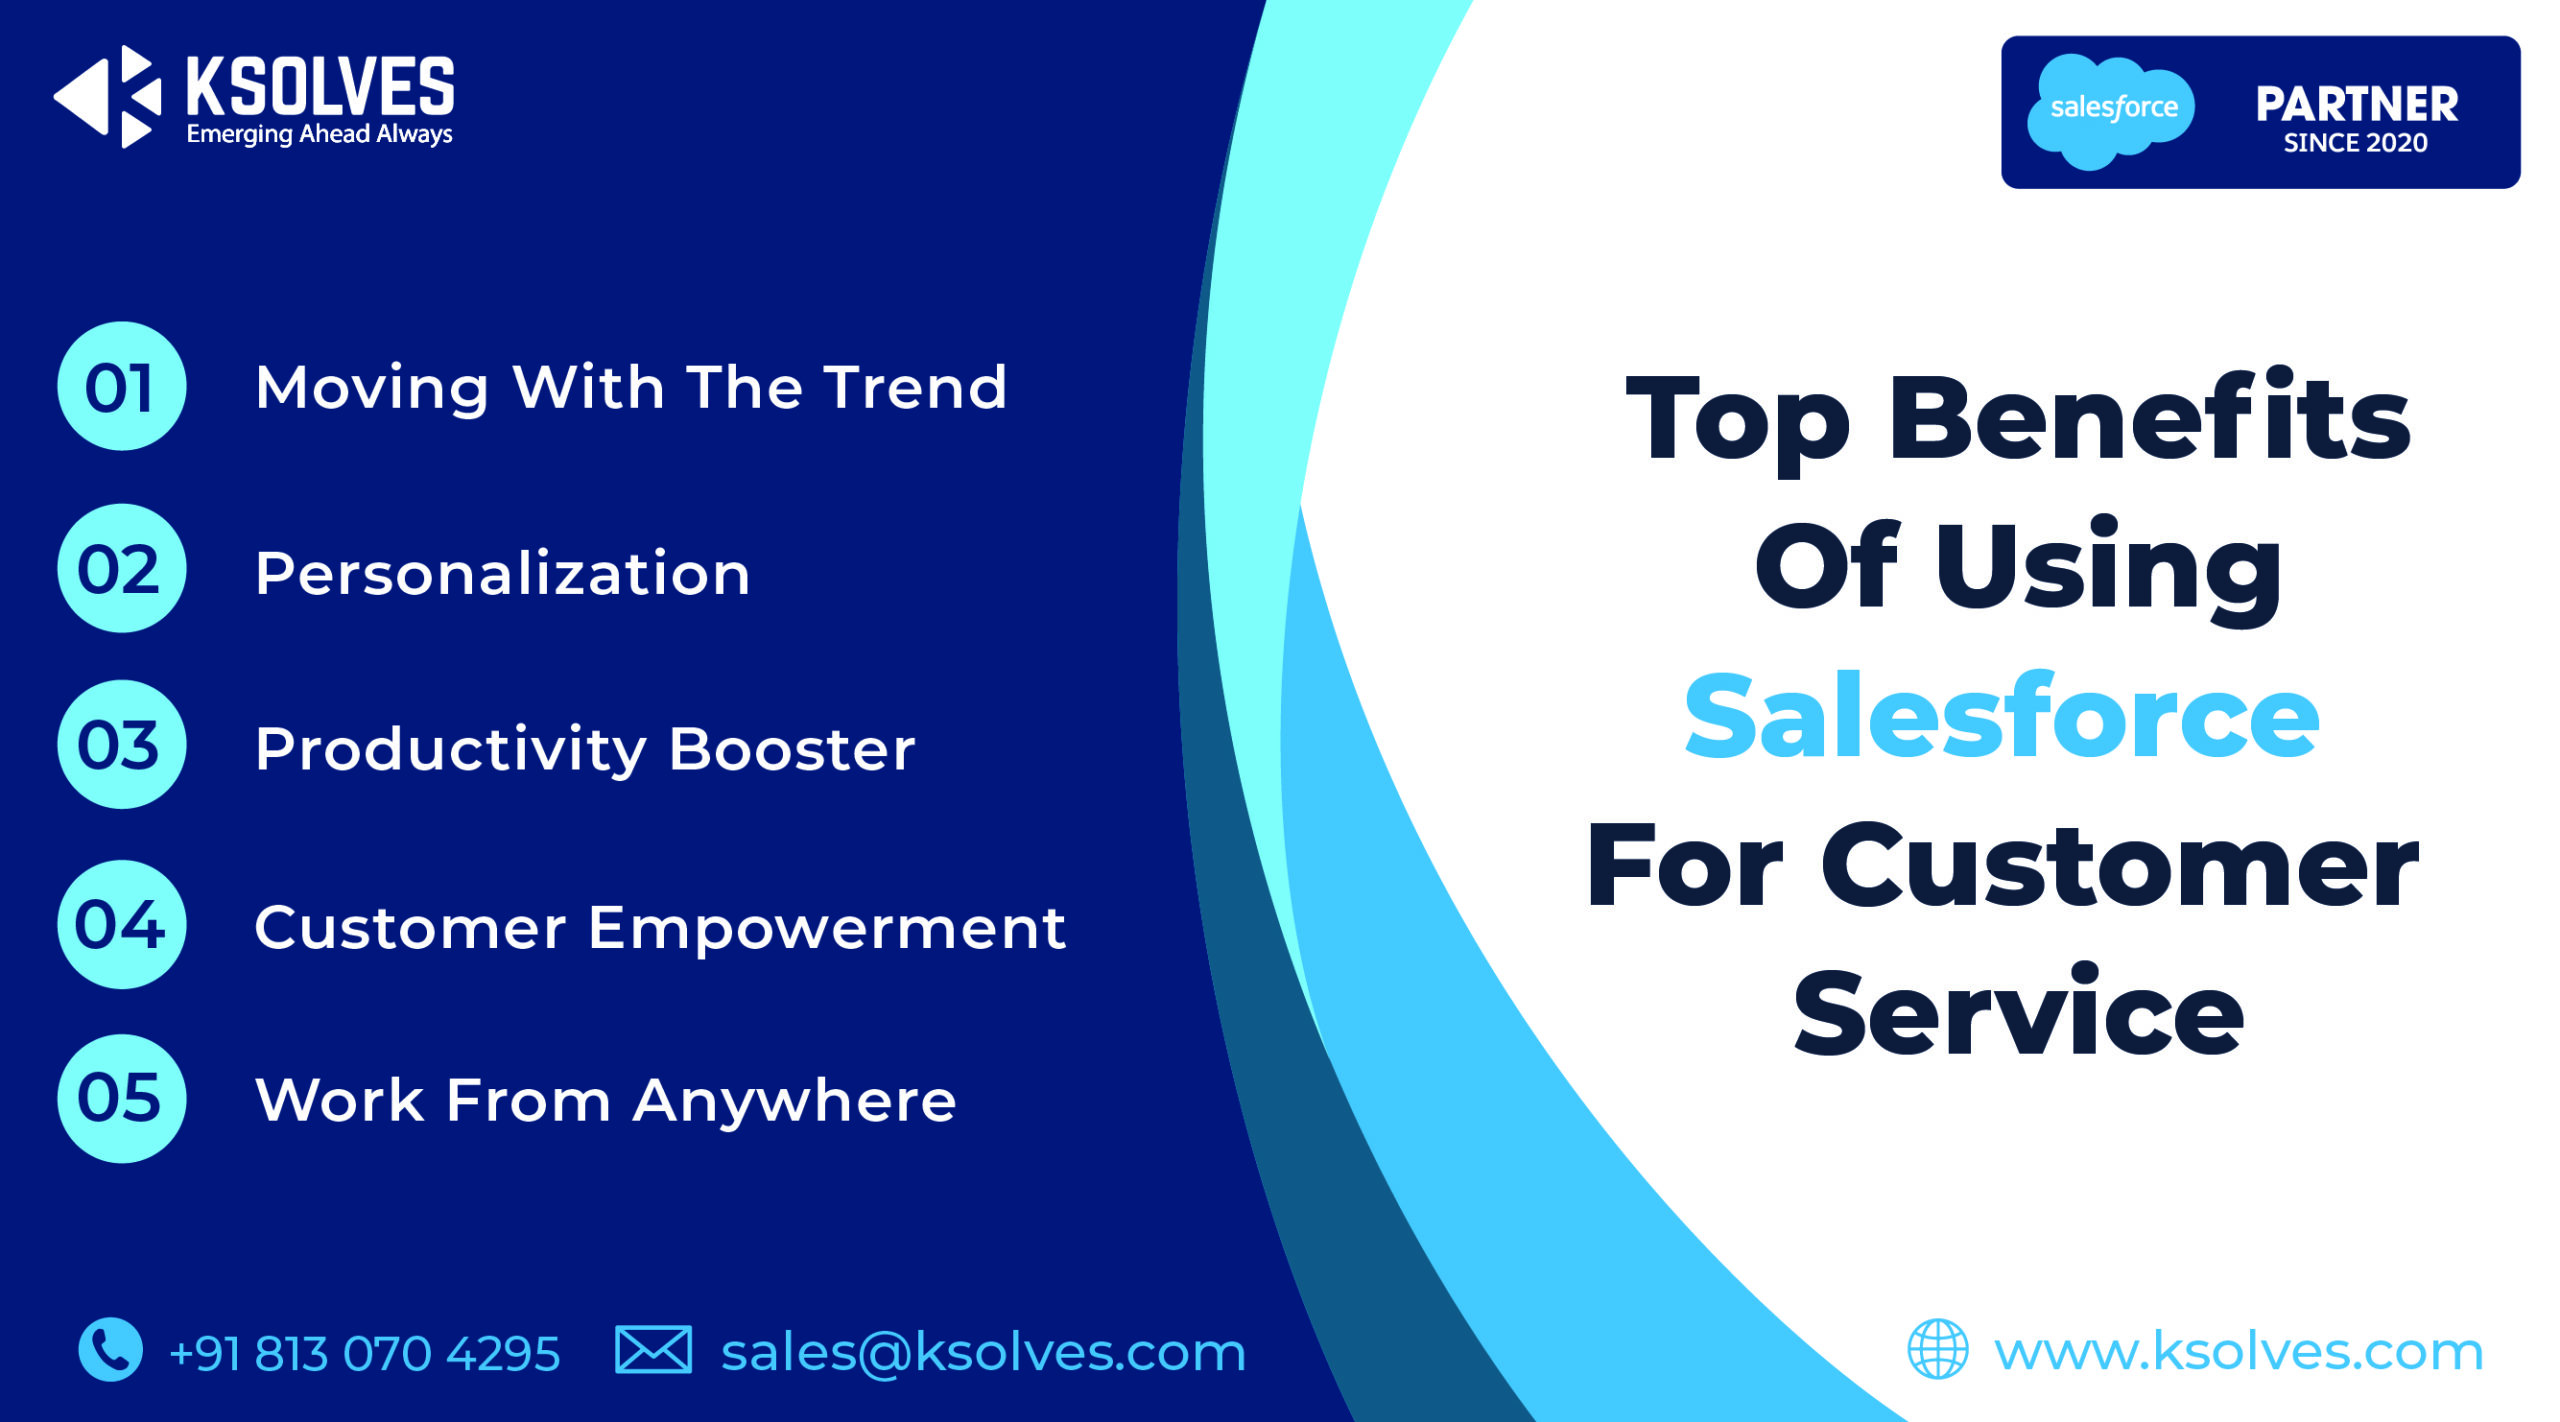 Using Salesforce For Customer Service